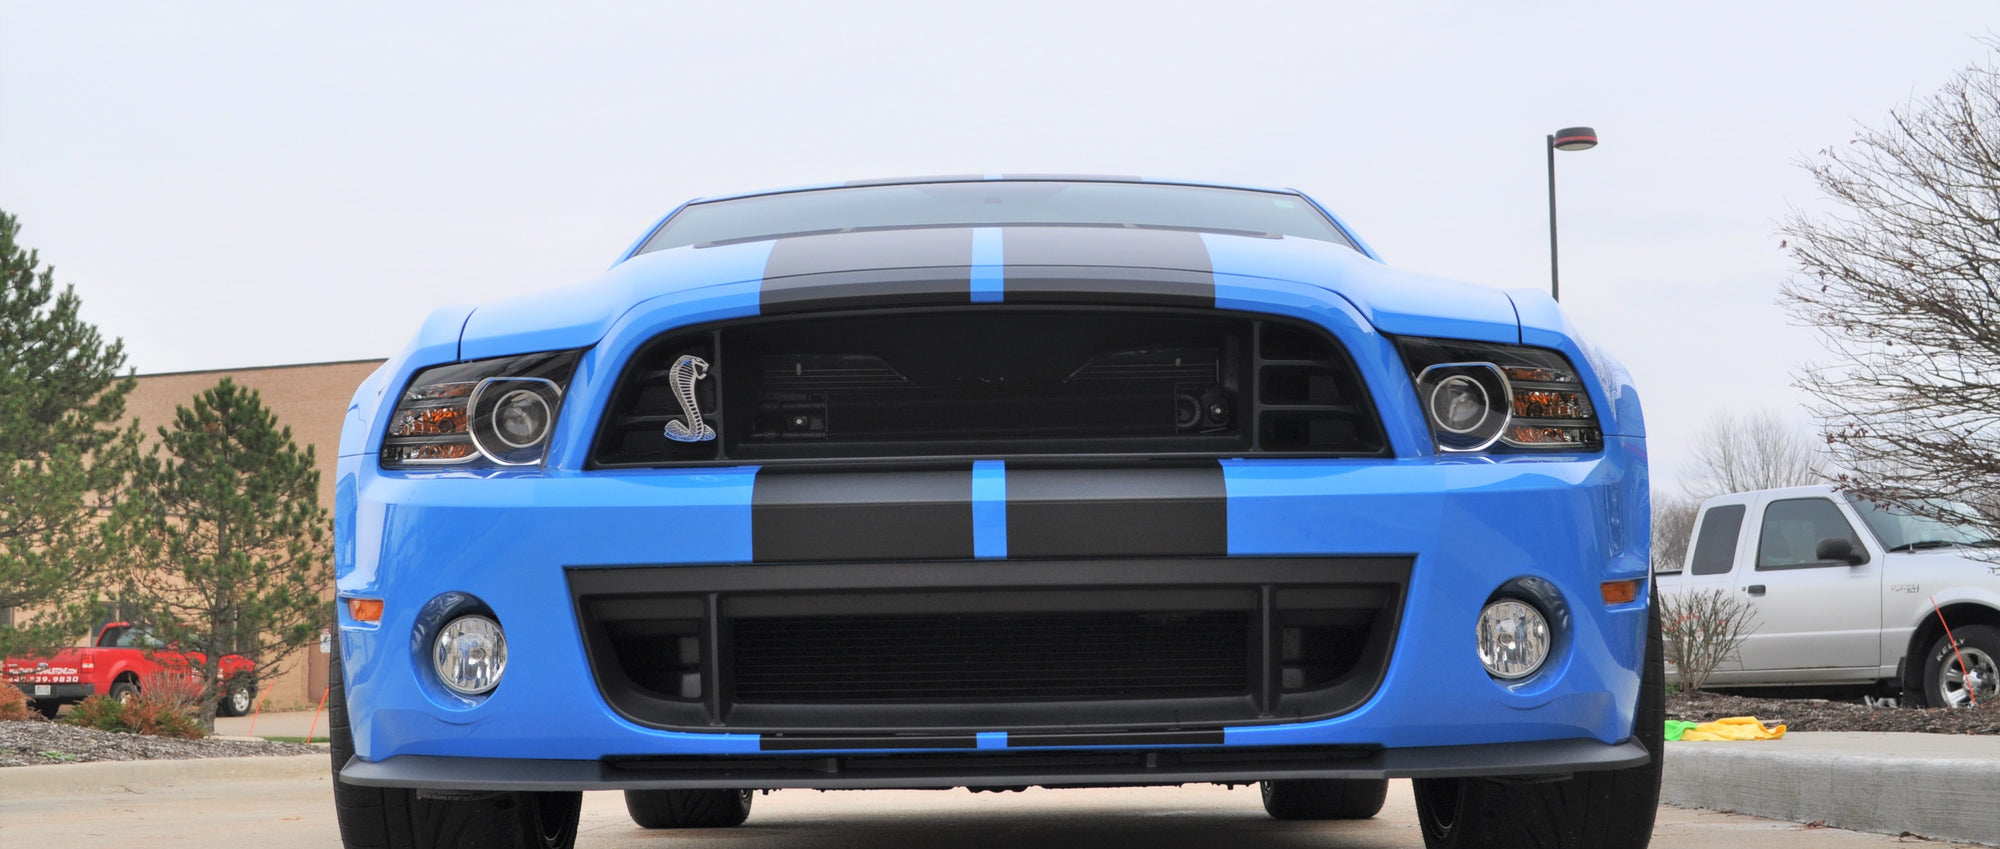 2013 Ford Mustang Shelby GT500 5.4L V8